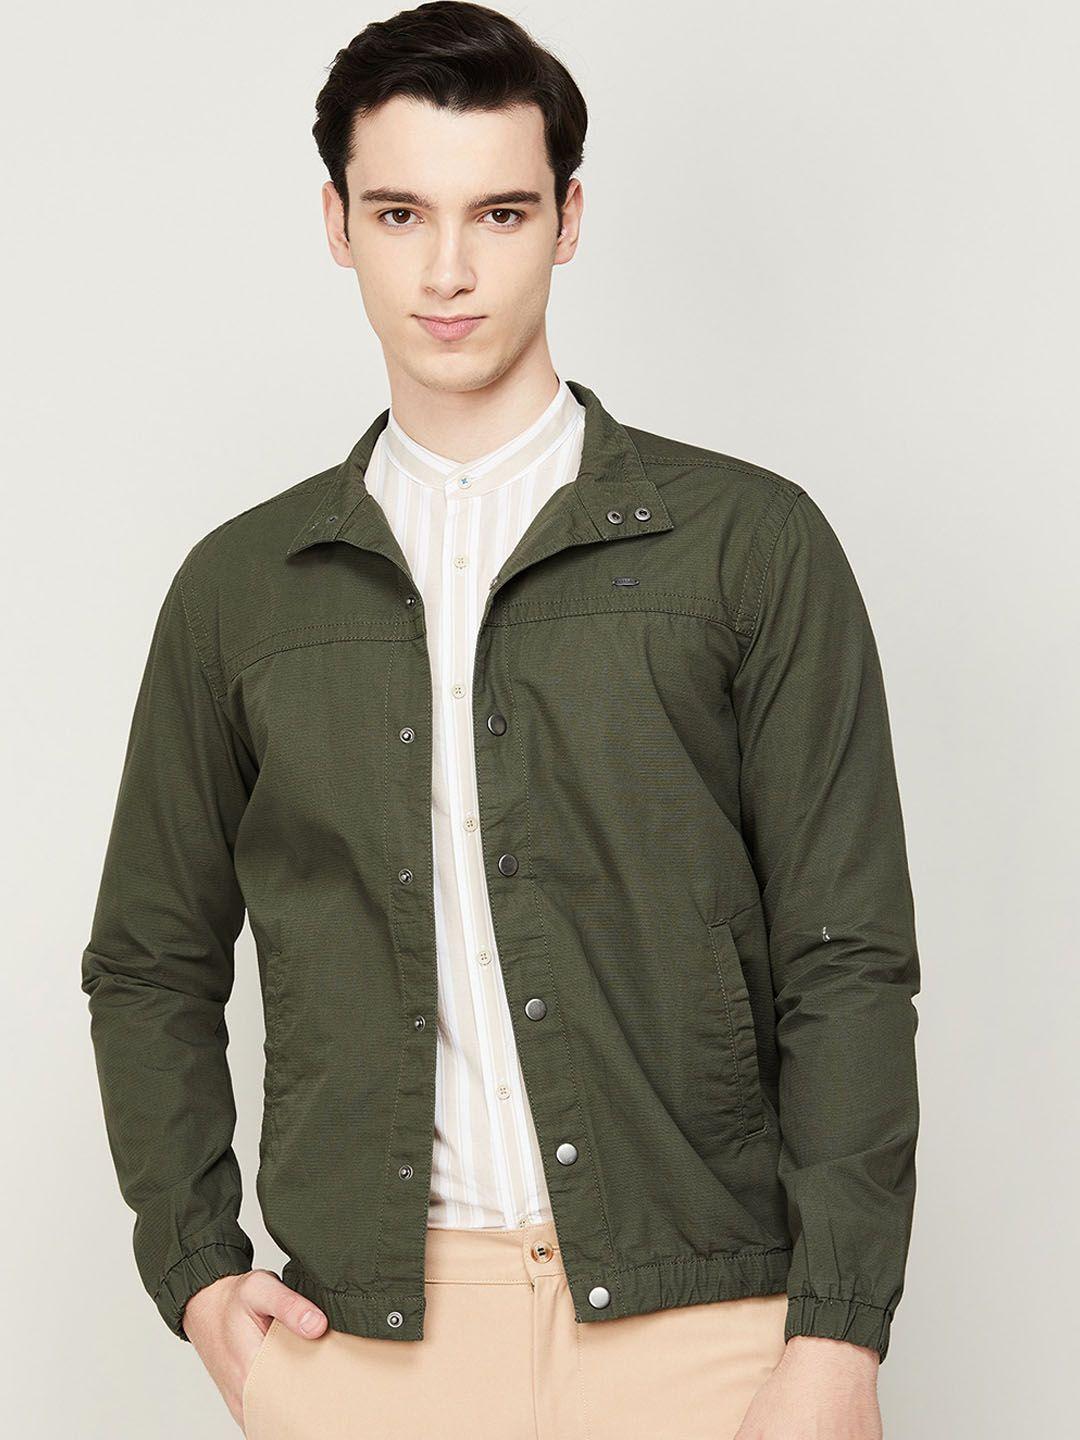 code-by-lifestyle-men-cotton-bomber-jacket